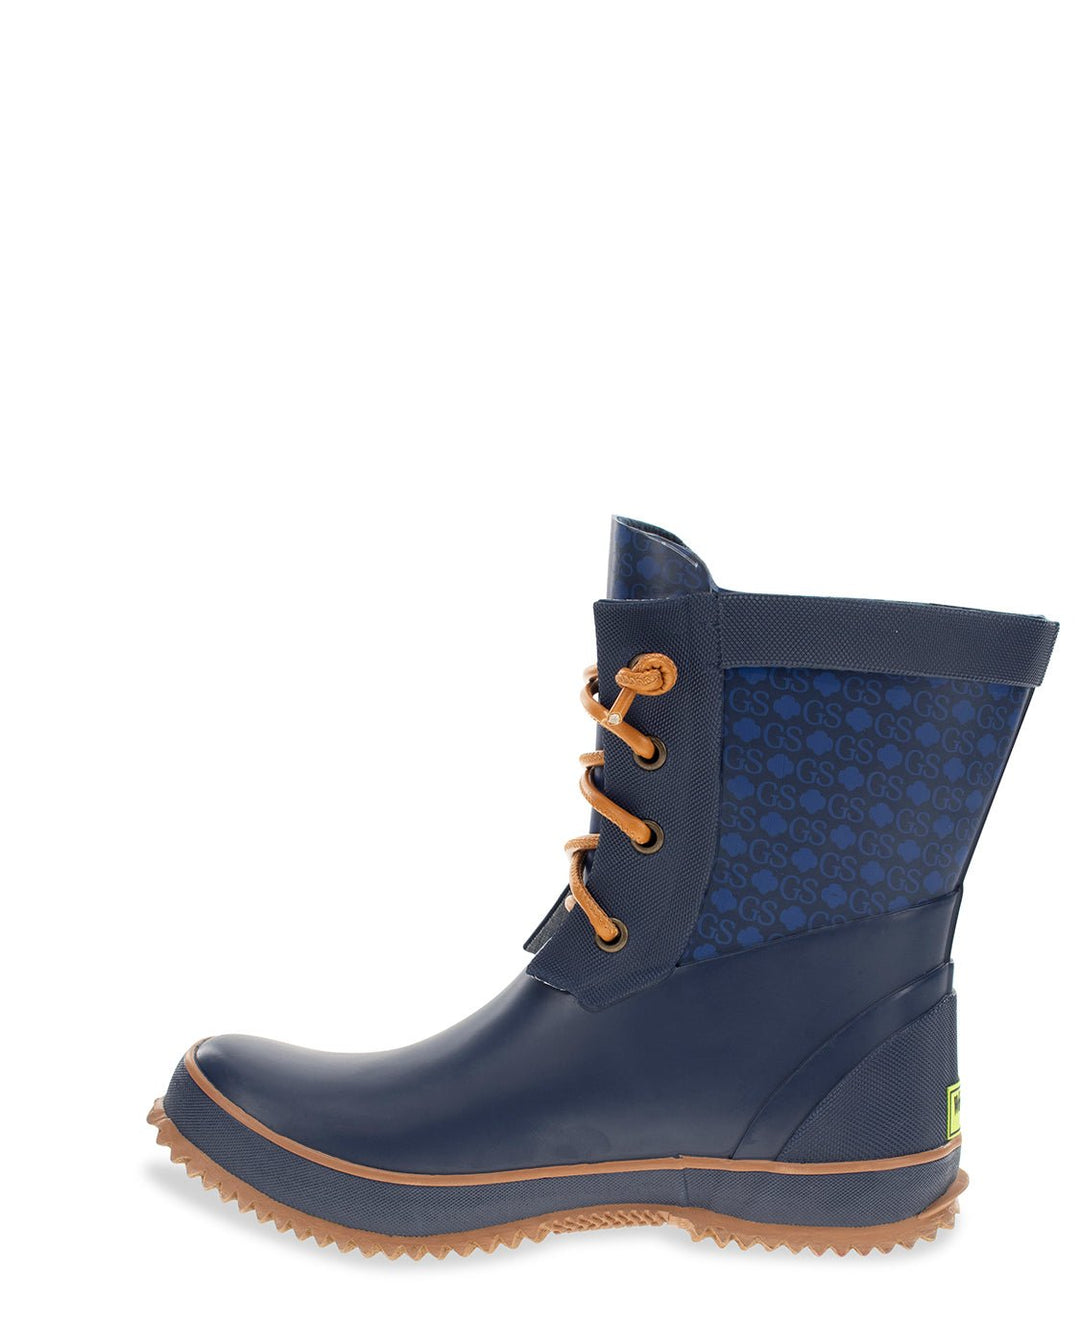 Women's Girl Scouts Legacy Danielle Mid Rain Boot - Navy - Western Chief